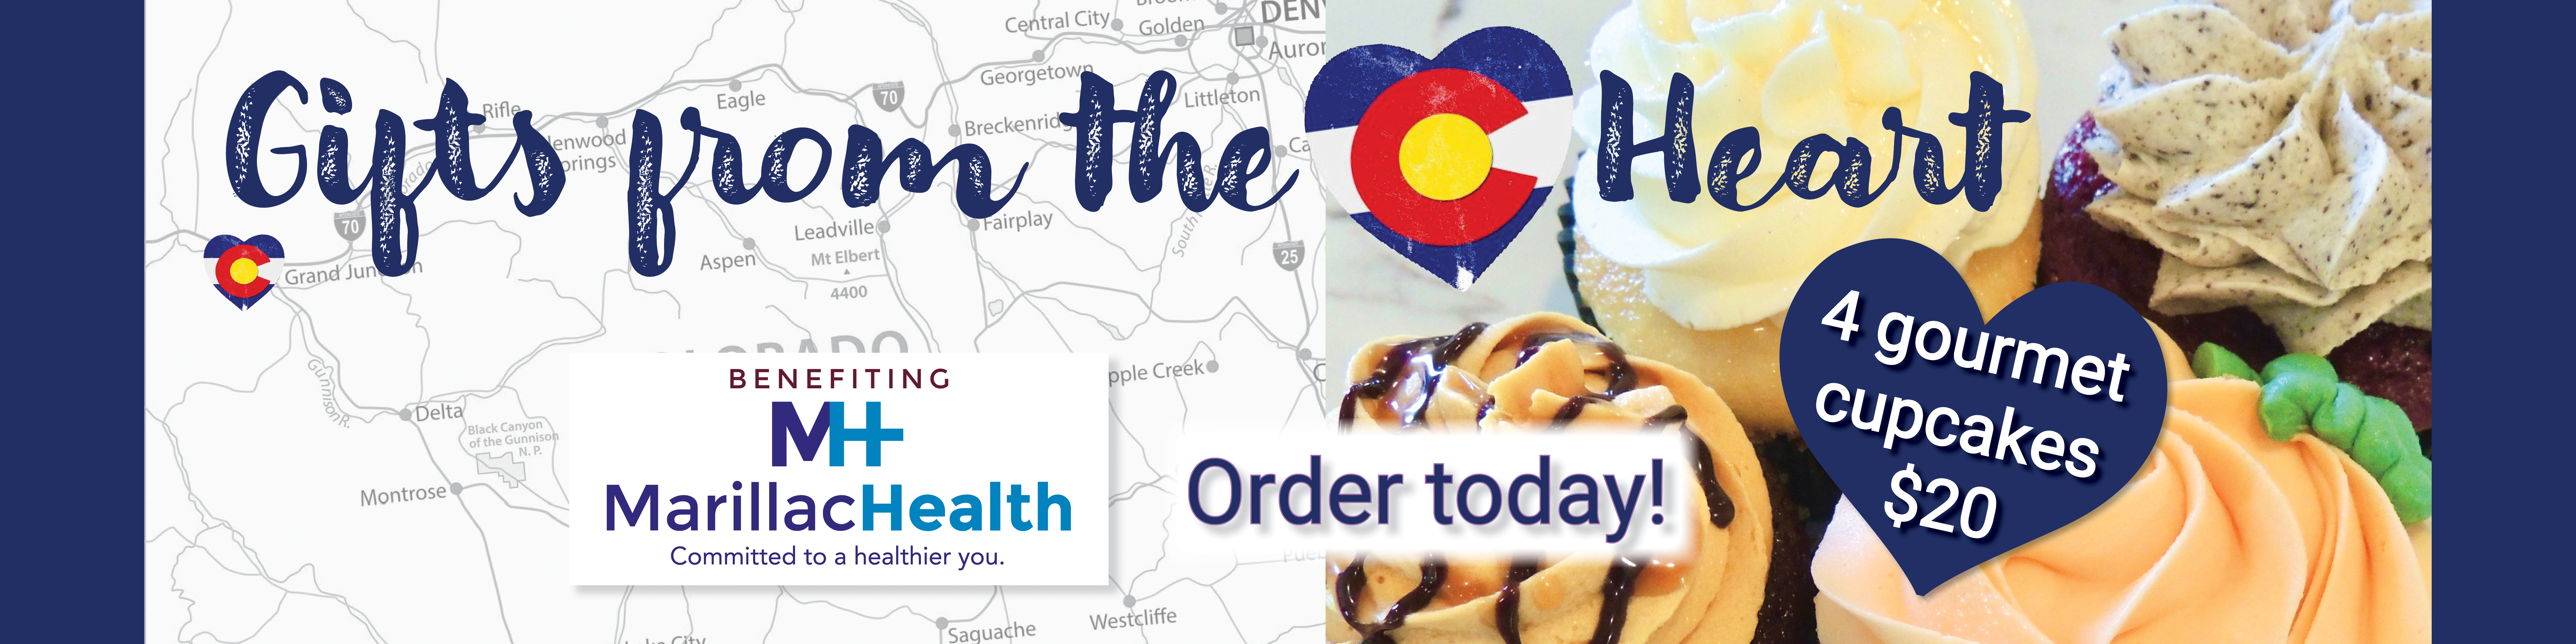 gifts from the heart cupcakes to support marillachealth grand junction